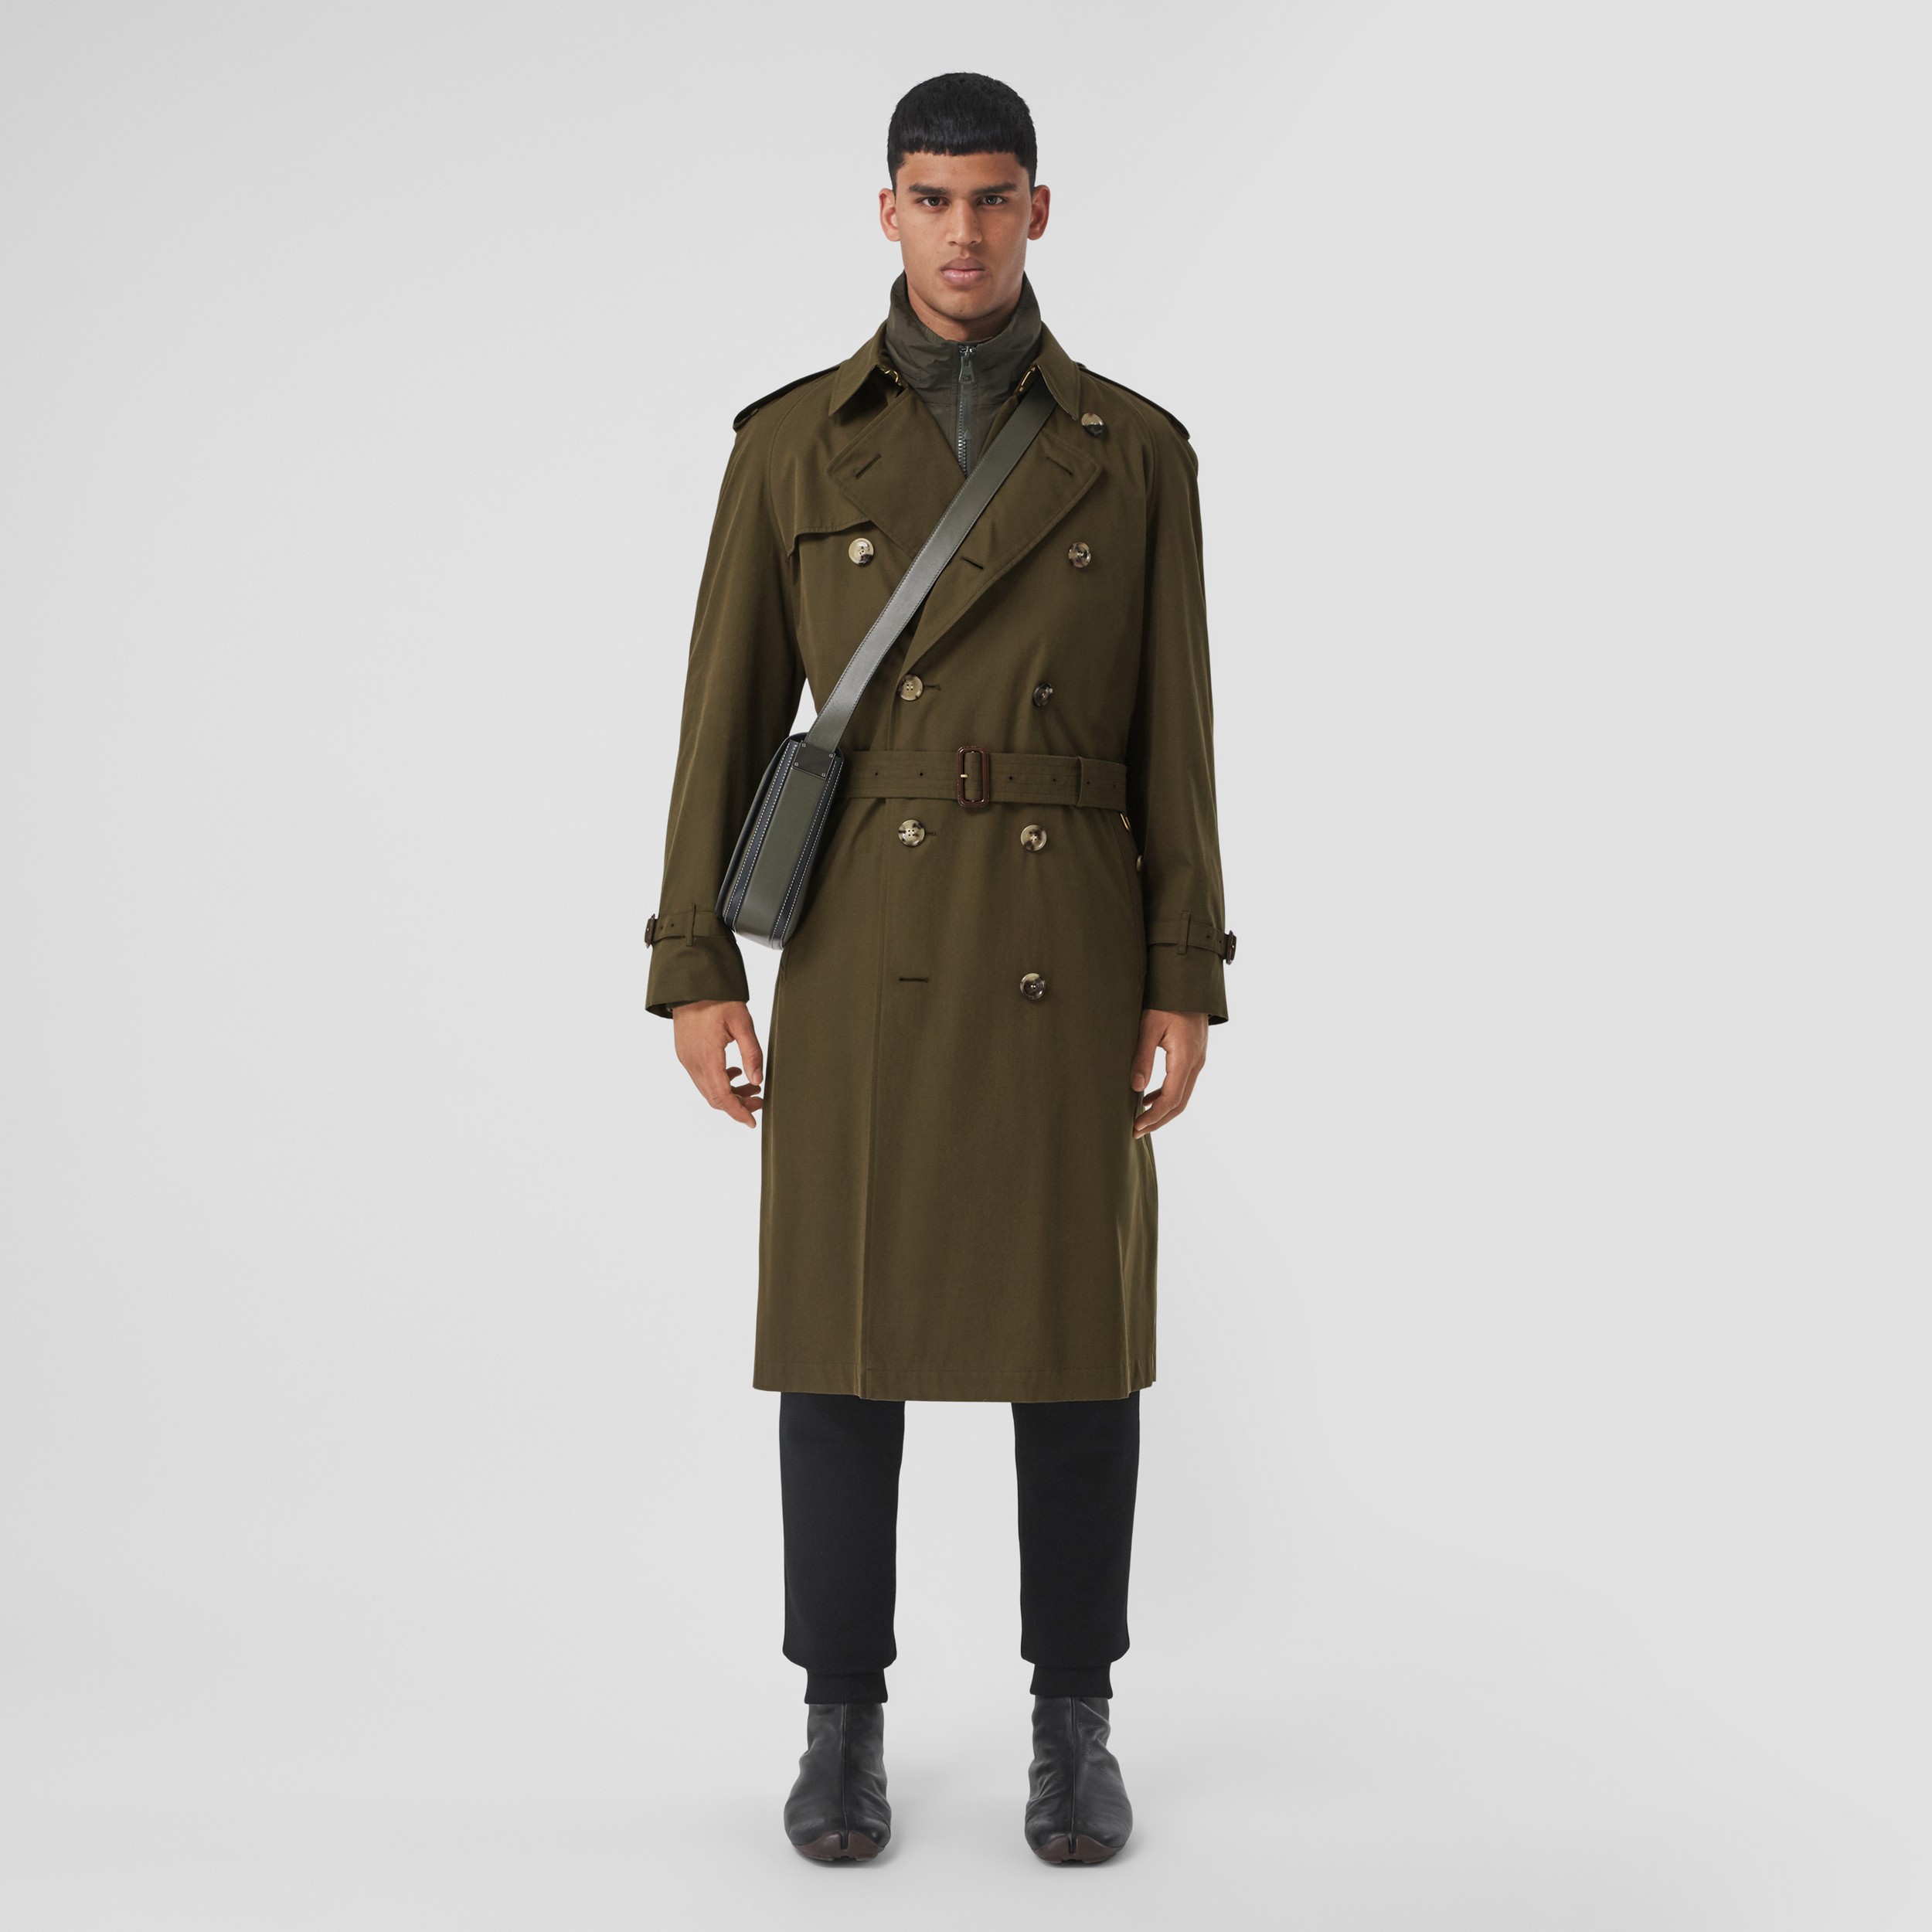 The Westminster Heritage Trench Coat In, What Goes Well With Khaki Trench Coat